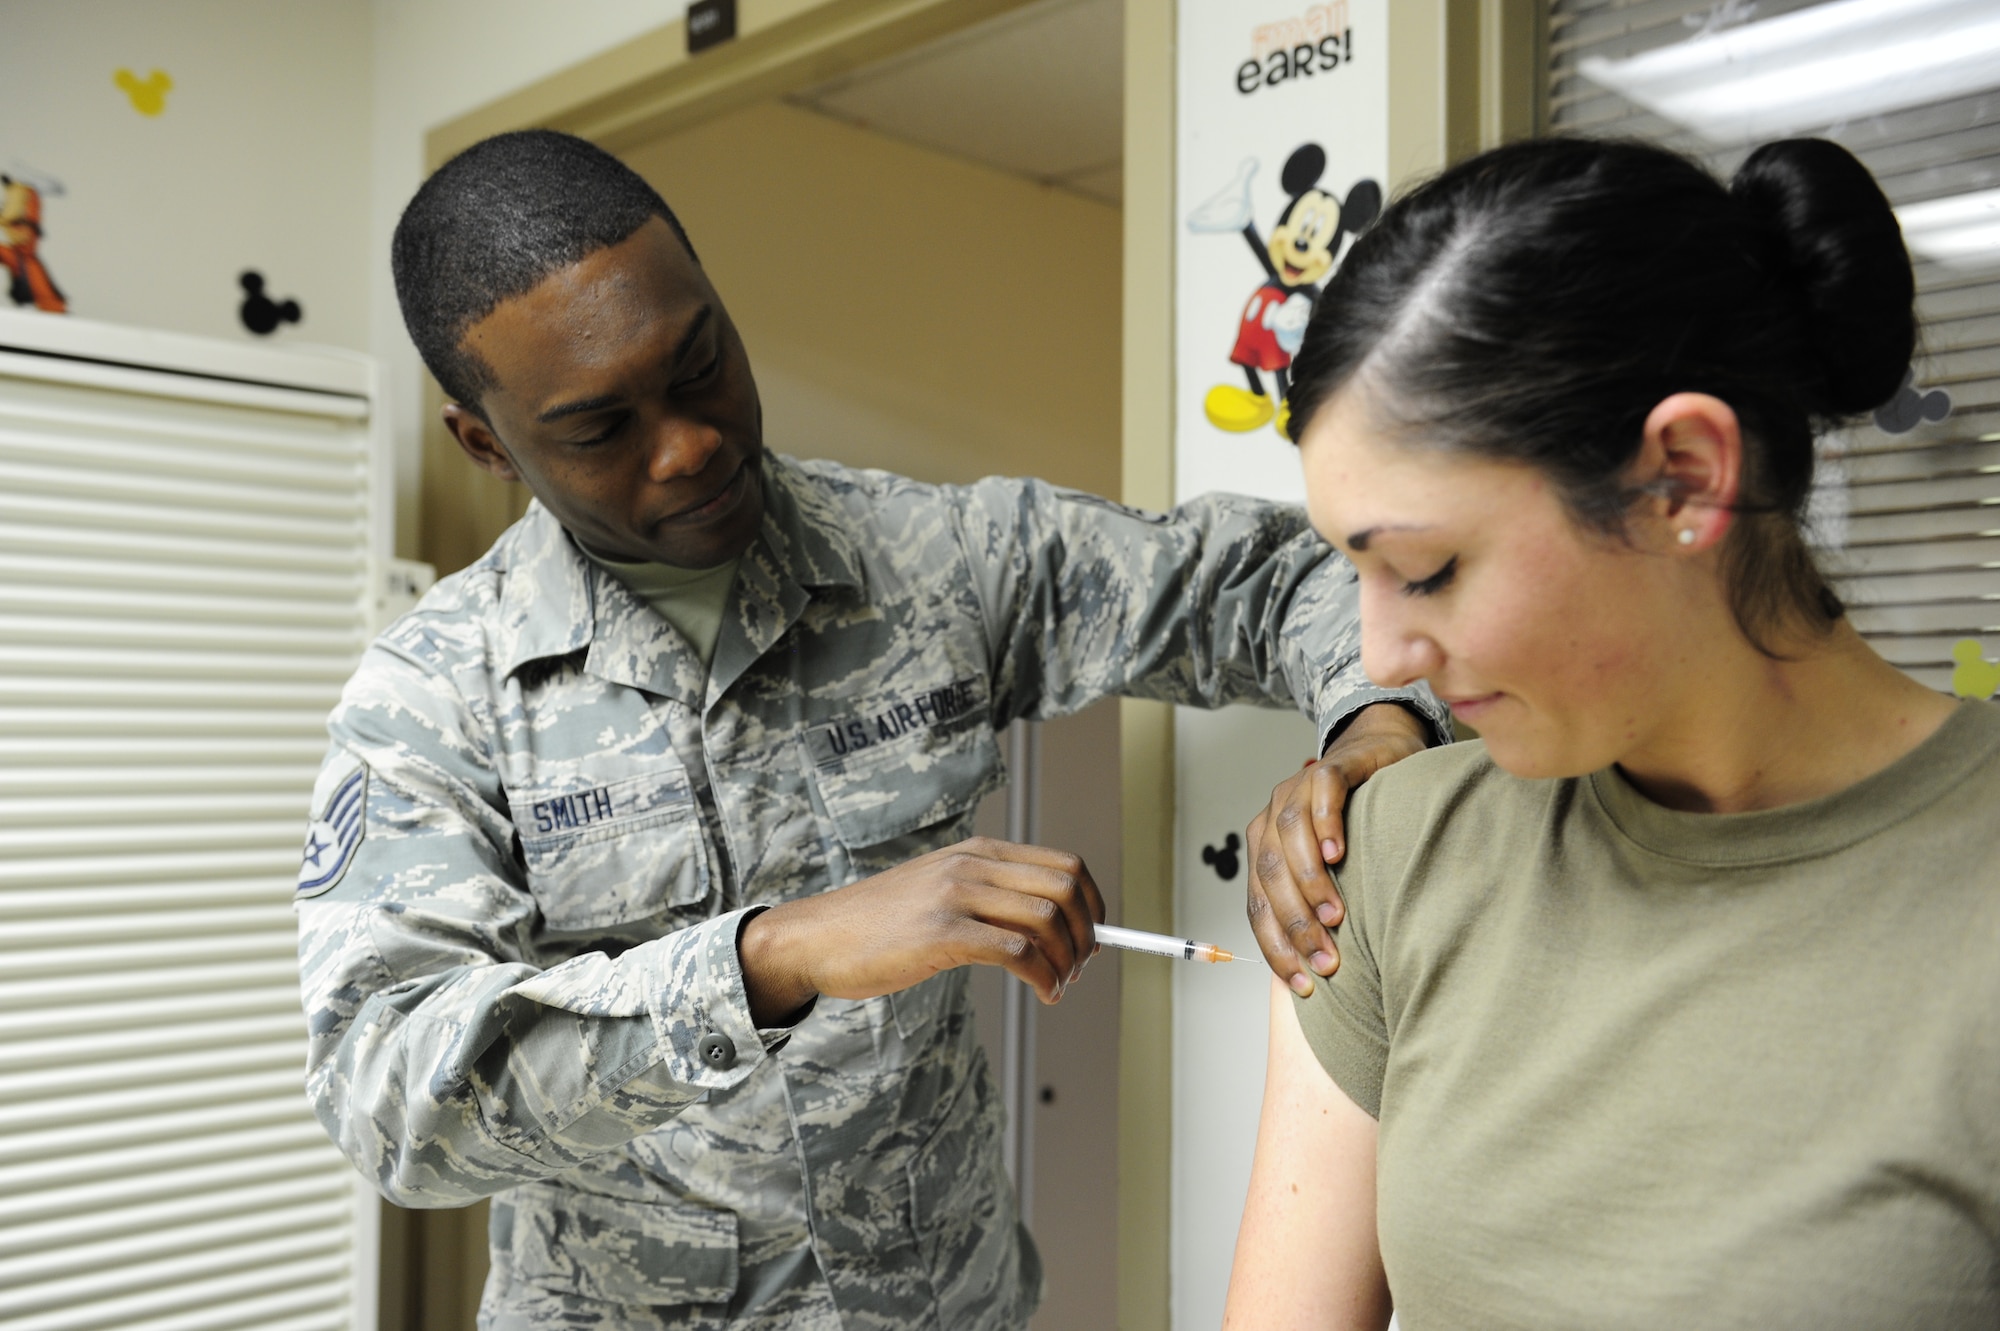 U.S. Air Force Staff Sgt. Hakeem Smith, 359th Medical Operations Squadron Immunization Clinic NCO in charge, simulates giving an immunization to Senior Airman Kayli O’Keefe, 359th MDOS medical technician, at the Joint Base San Antonio-Randolph, Texas, Sept. 25, 2019. With flu season quickly approaching, health care professionals throughout JBSA are encouraging beneficiaries to receive their flu shots once the vaccines are available. The flu is spread throughout the year, but is most common during the fall and winter months. Influenza activity typically begins to increase in October and November, peaking during the winter months and continuing as late as May. (U.S. Air Force photo by Tech. Sgt. Ave I. Young)